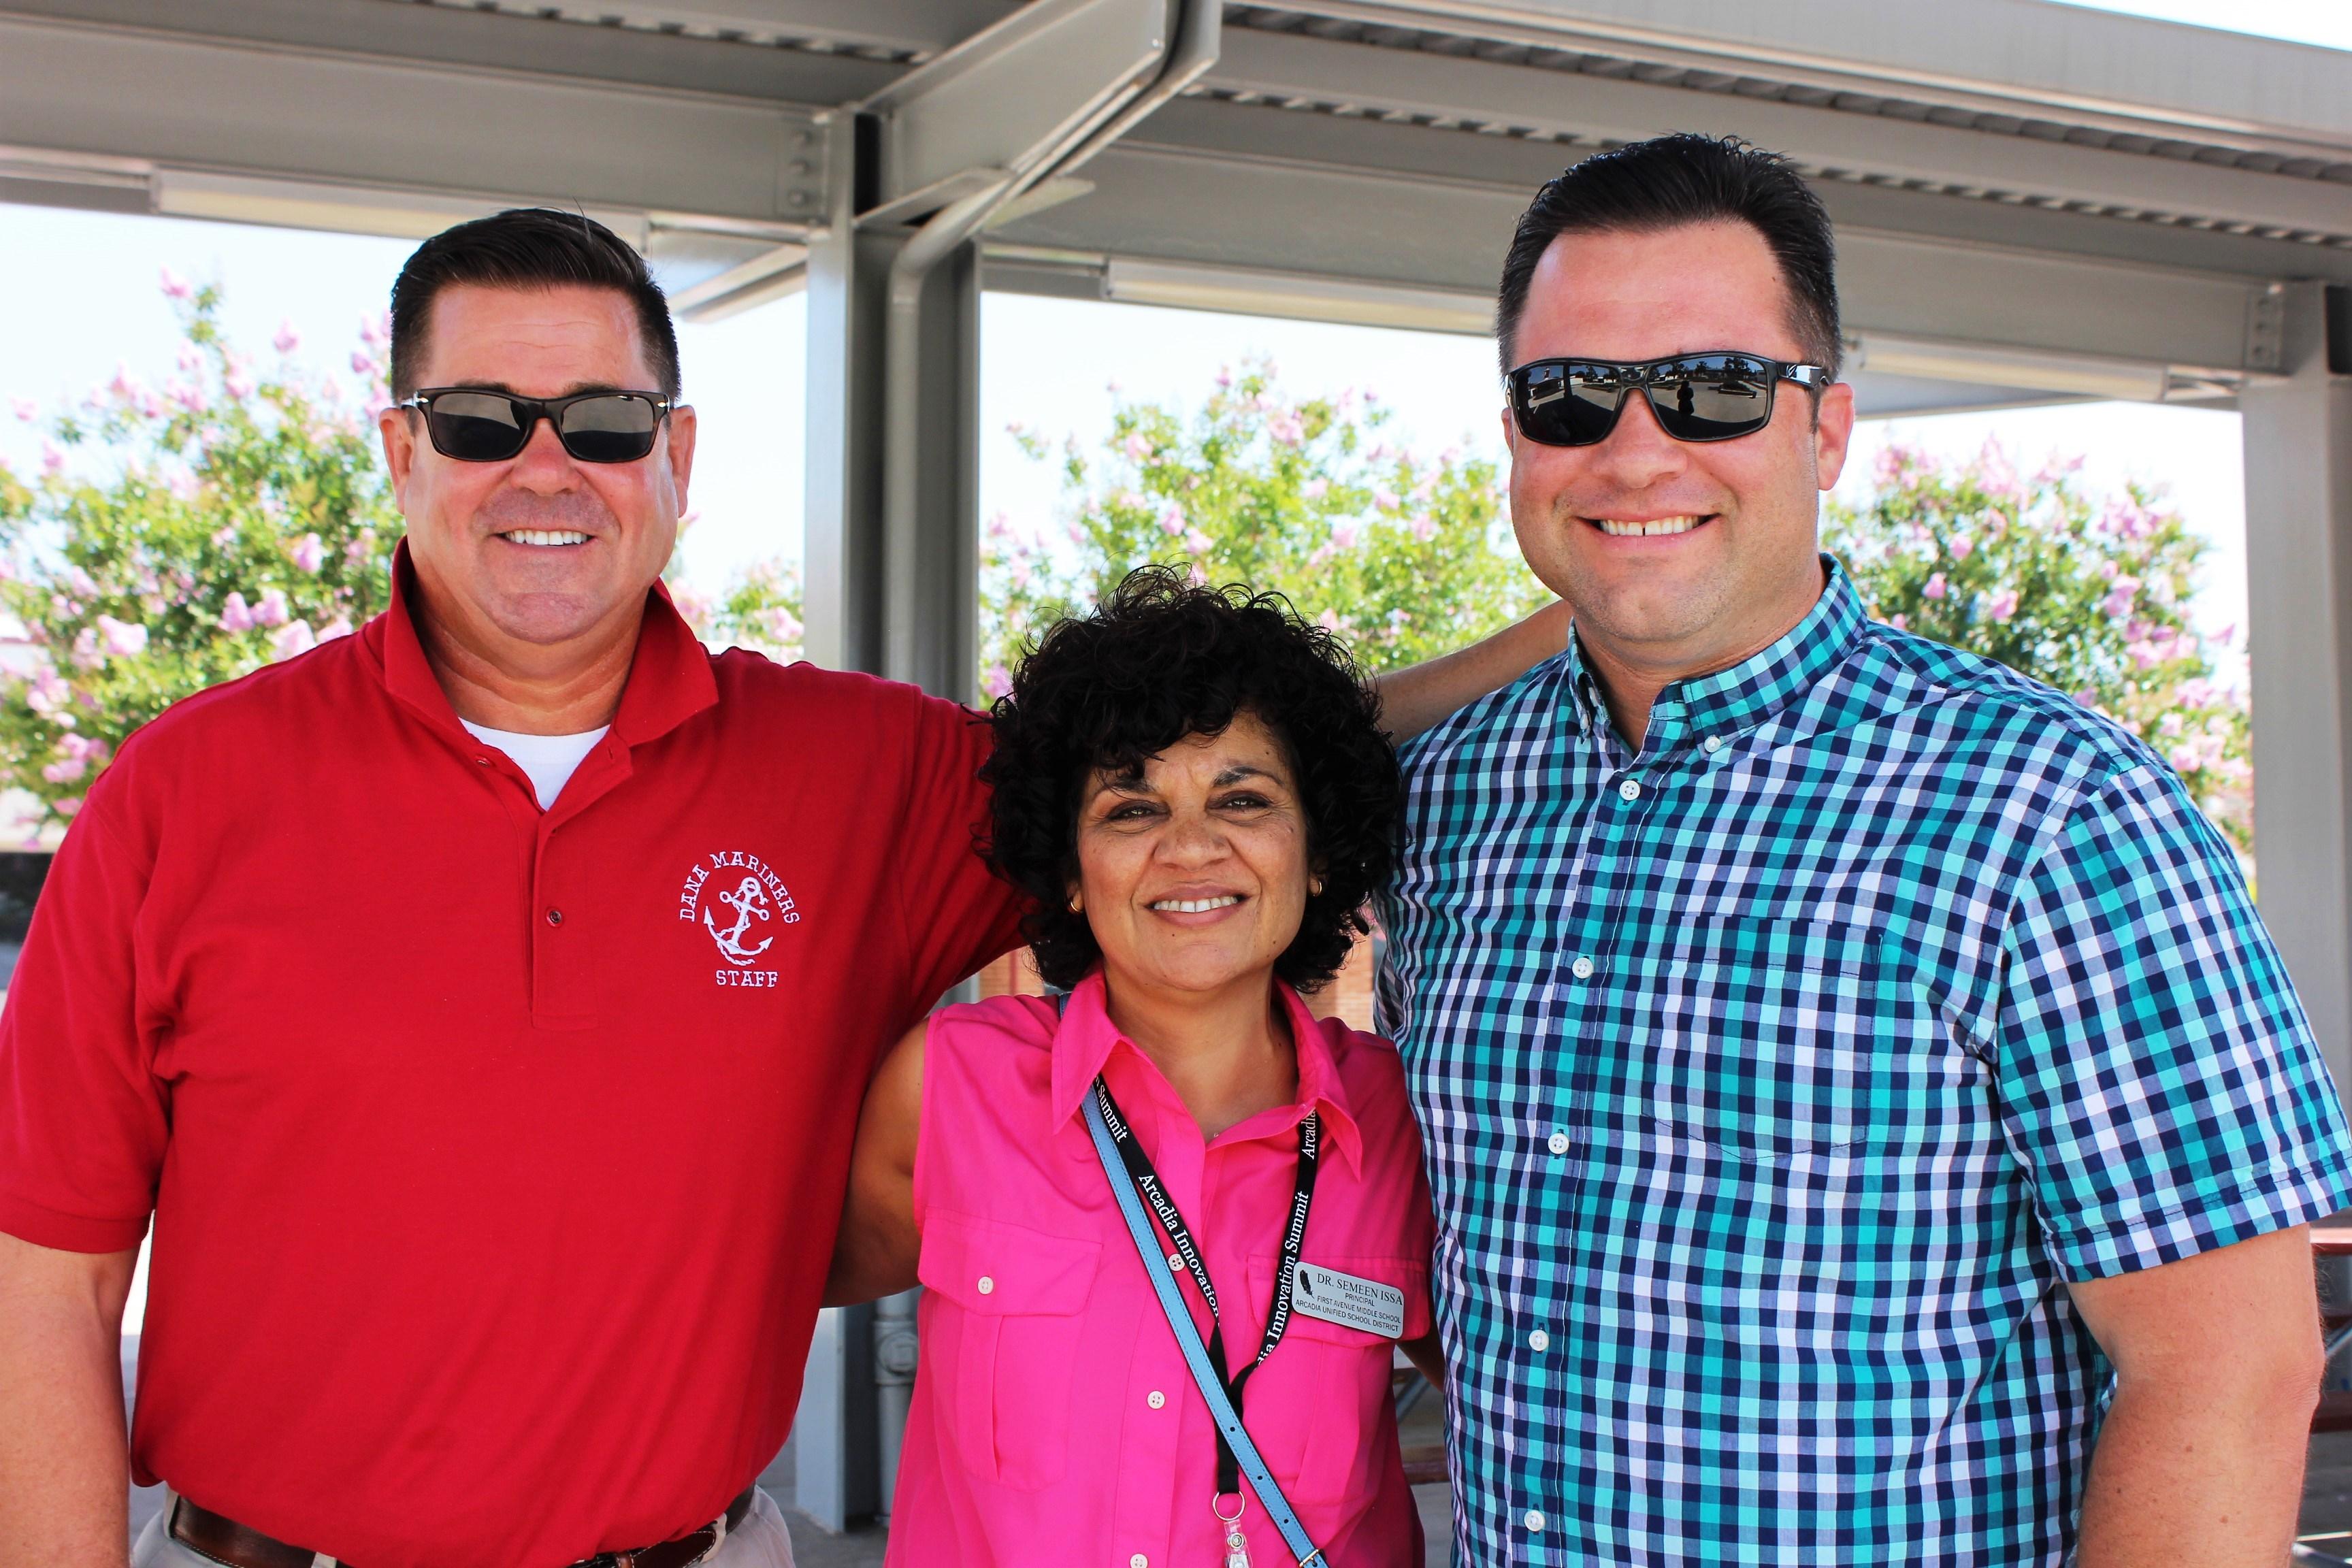 From left to right, Dr. Daniel Hacking, Principal Dana Middle School, Dr. Semeen Issa, Principal First Avenue Middle School, Mr. Benjamin Acker, Principal Foothills Middle School 